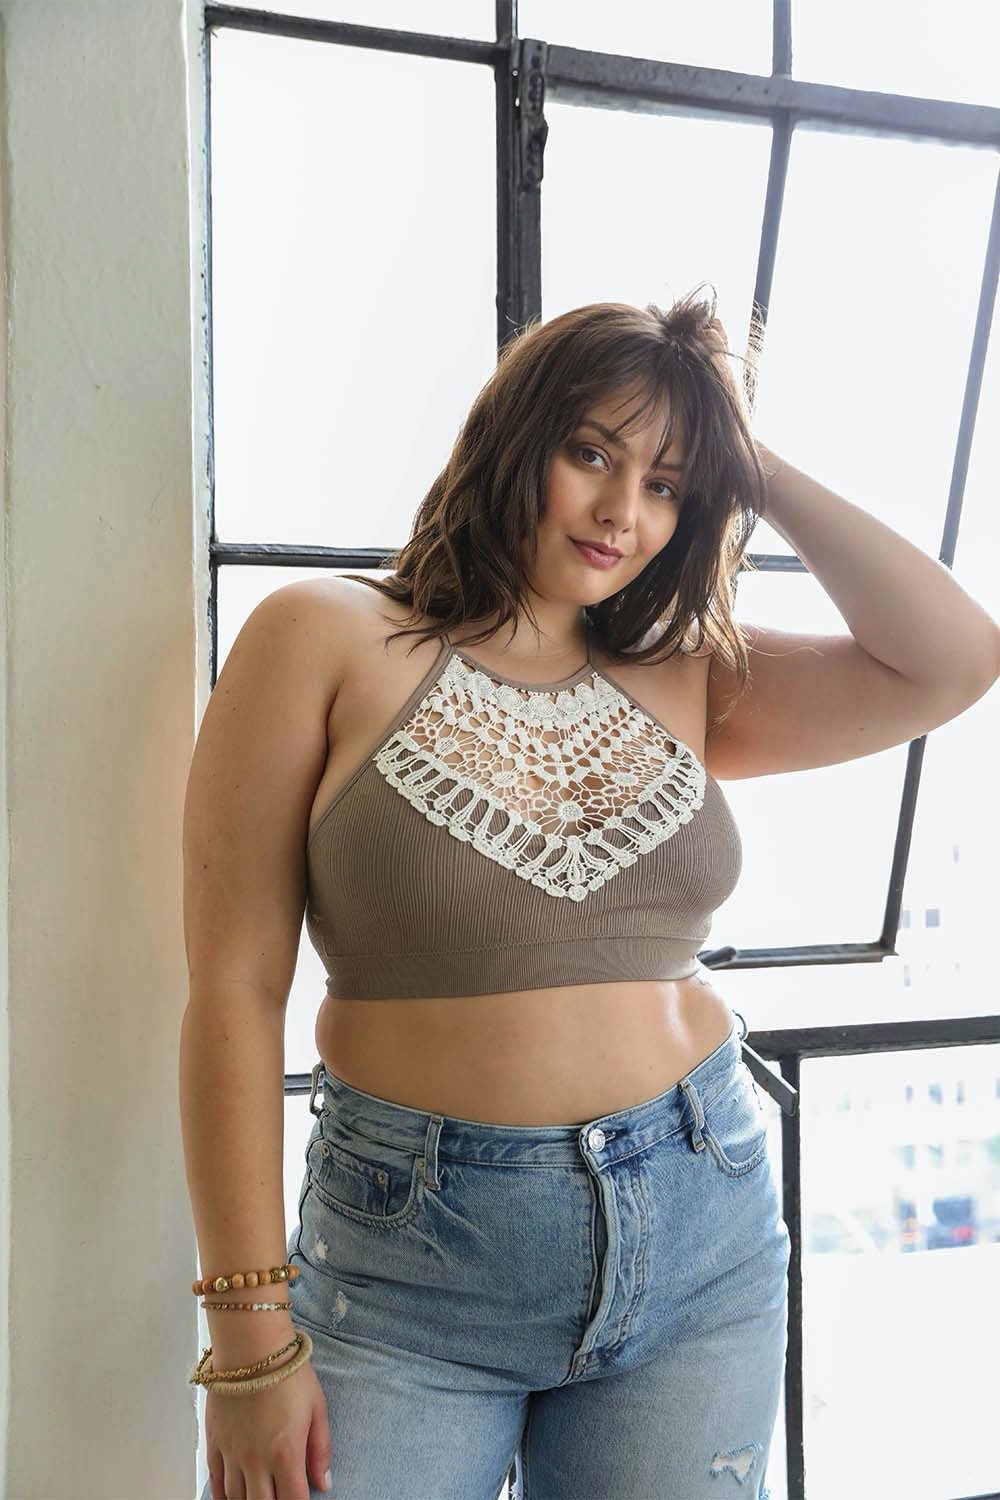 Crochet Lace High Neck Bralette - BeExtra! Apparel & More